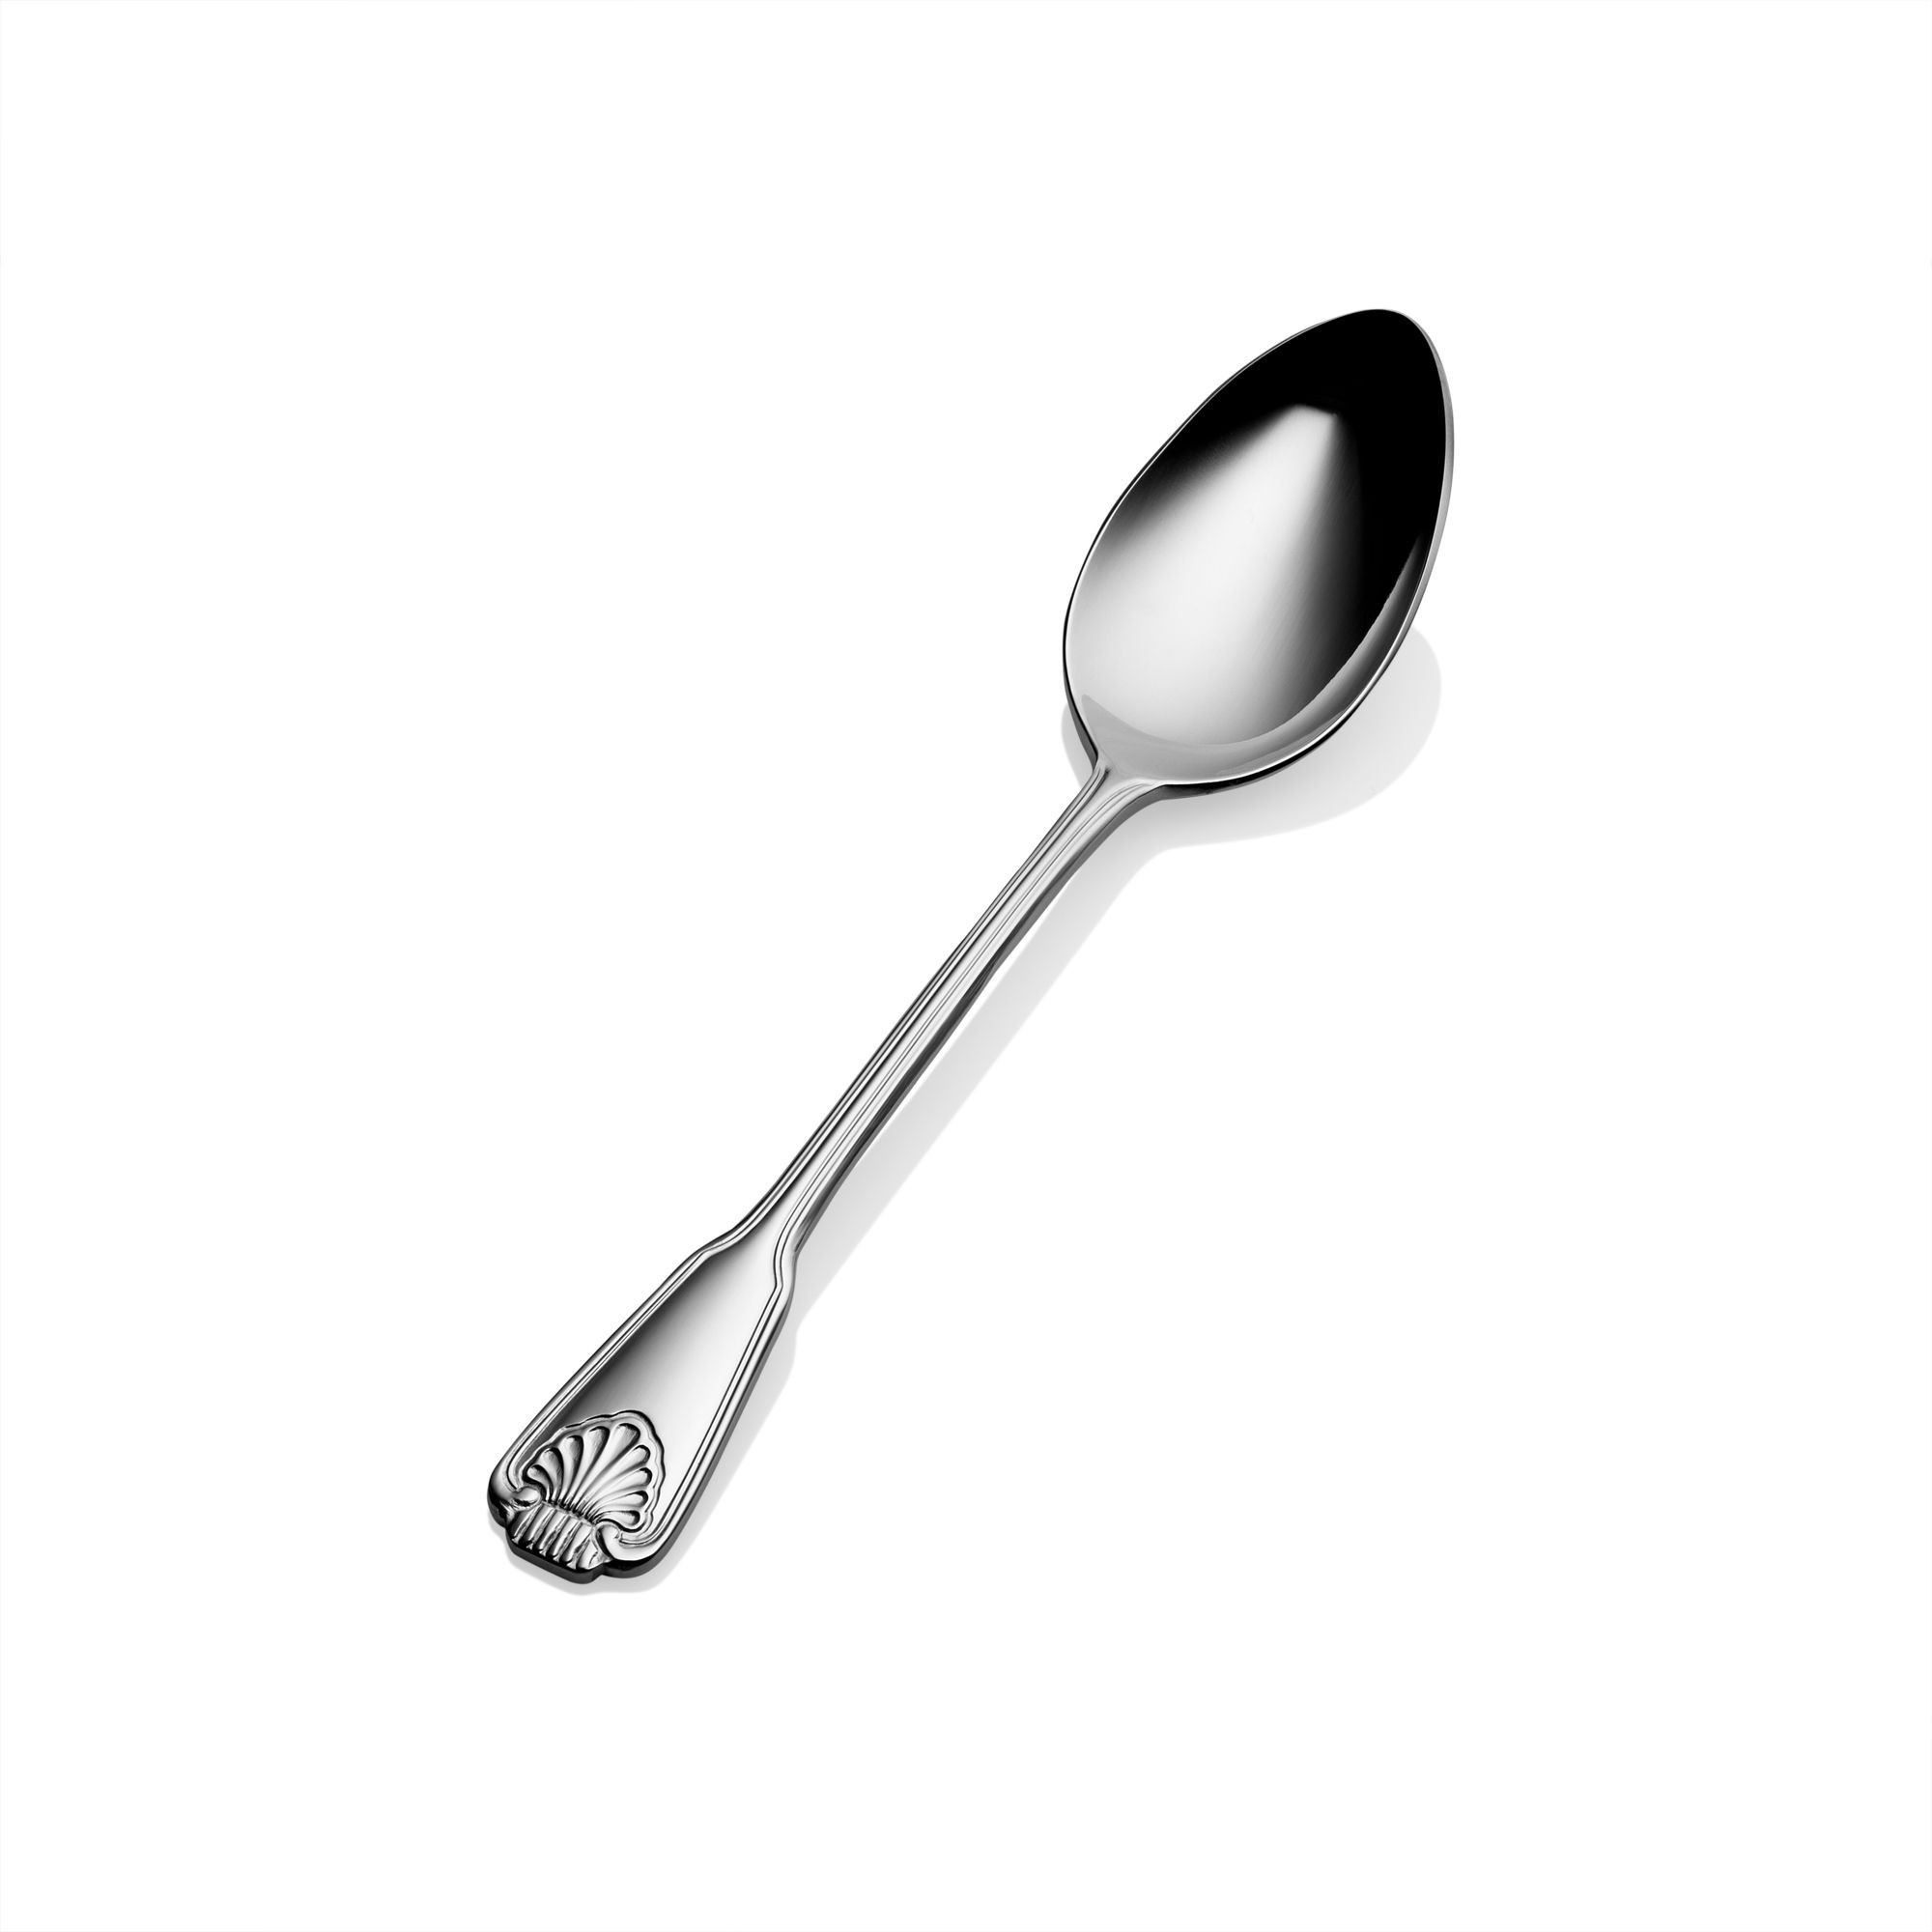 Bon Chef S2003 Shell 18/8 Stainless Steel Soup and Dessert Spoon